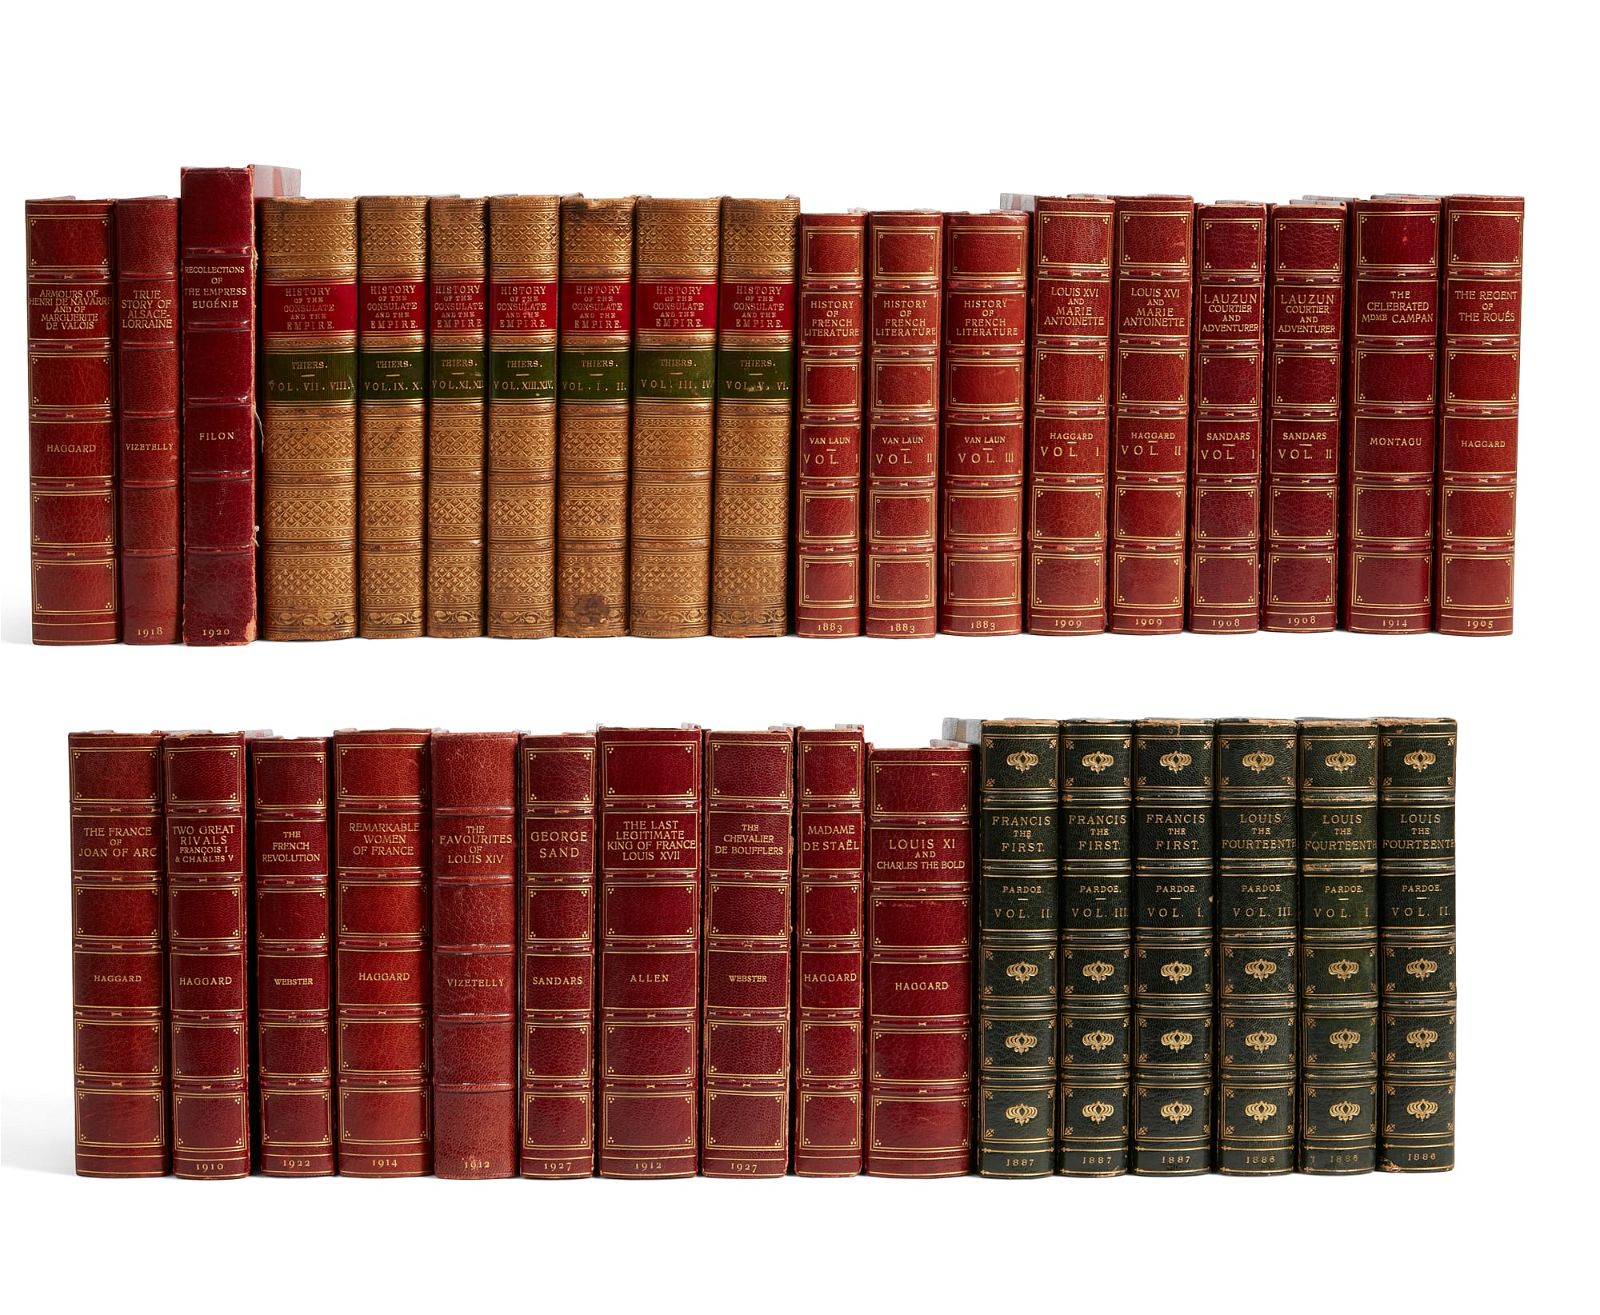 FRENCH HISTORY (35 VOLUMES)French